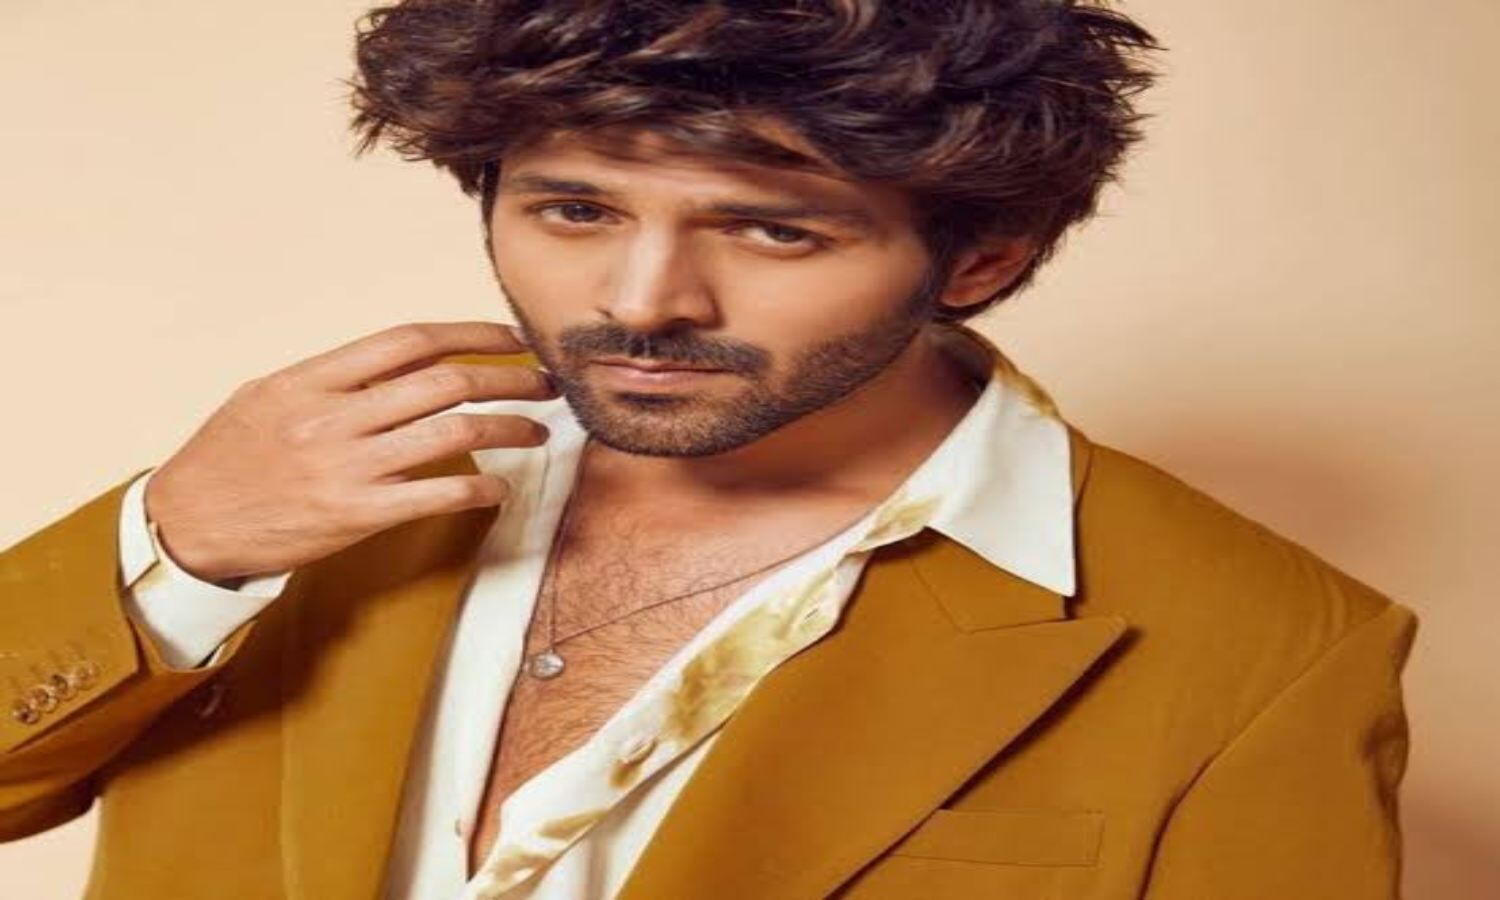 Aashiqui 3: The concept trailer of Kartik Aaryan’s upcoming movie Aashiqui 3 has been launched